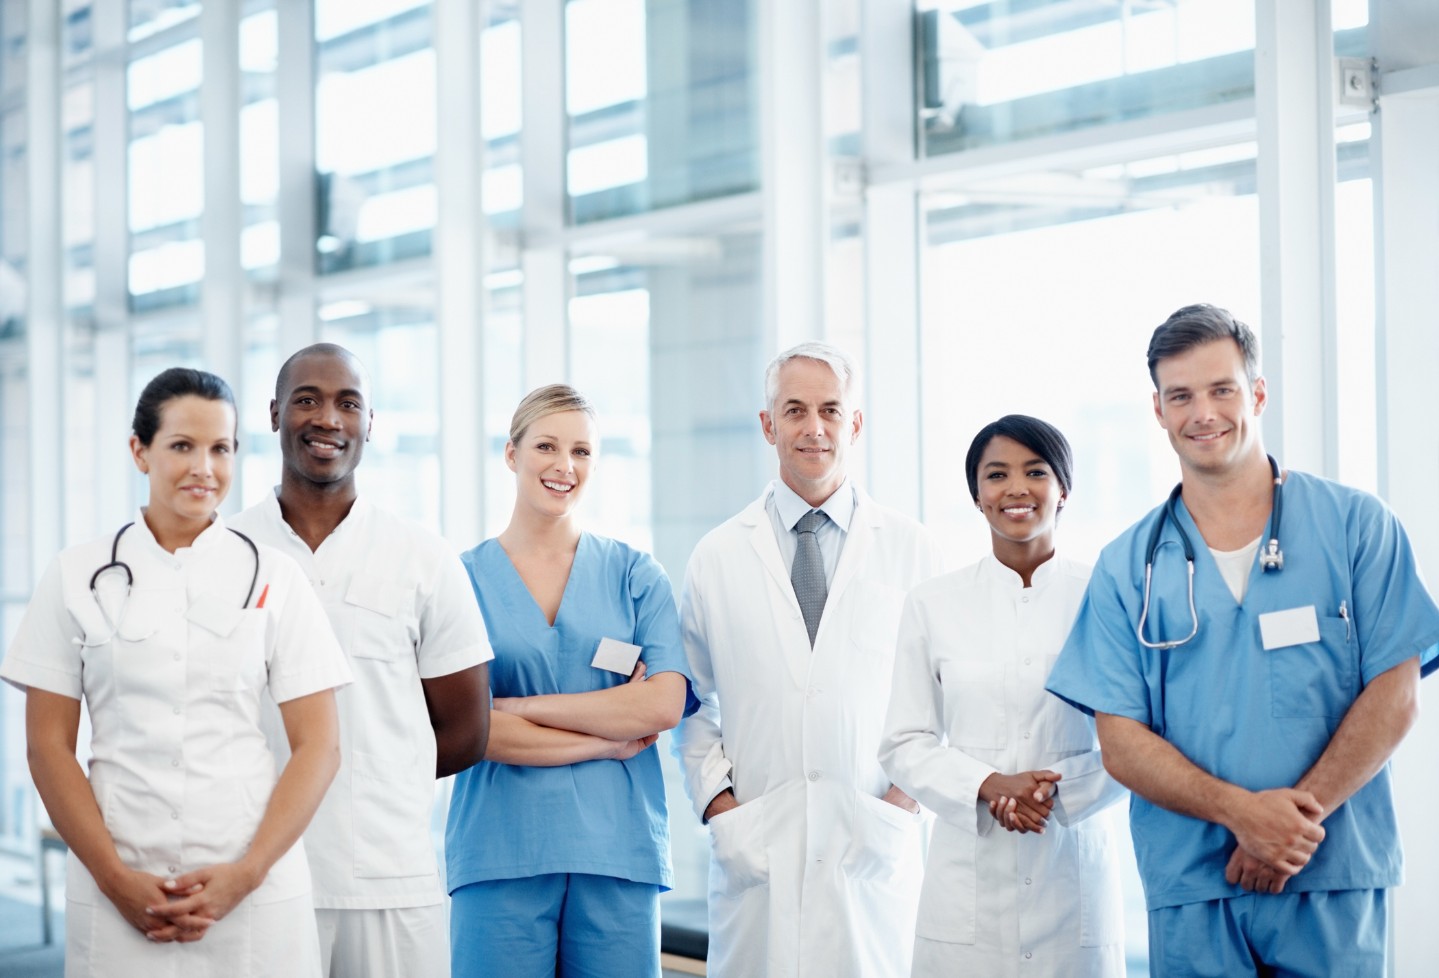 Group of medical providers